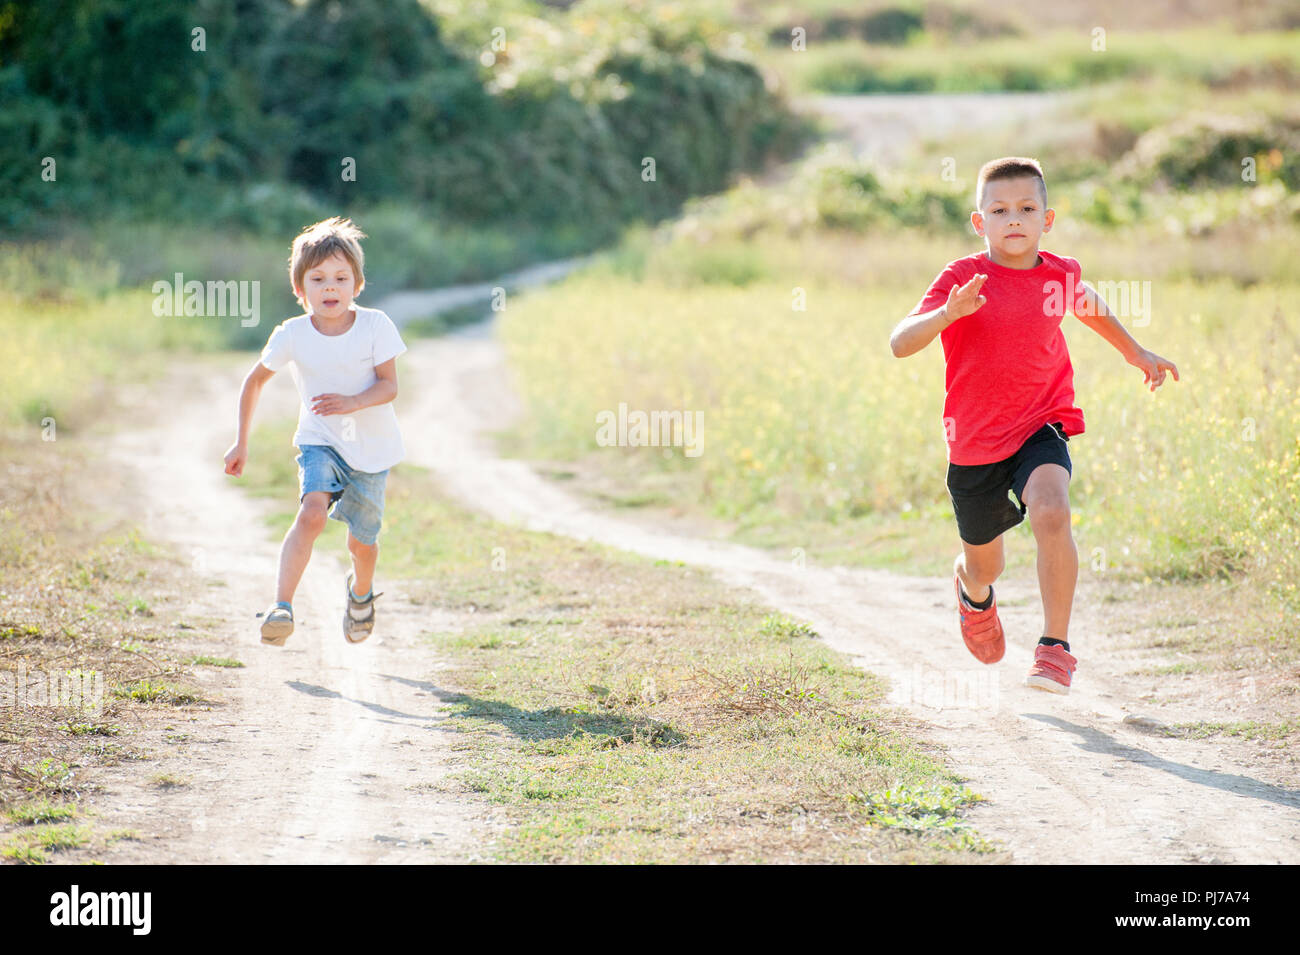 two running healthy little boys 